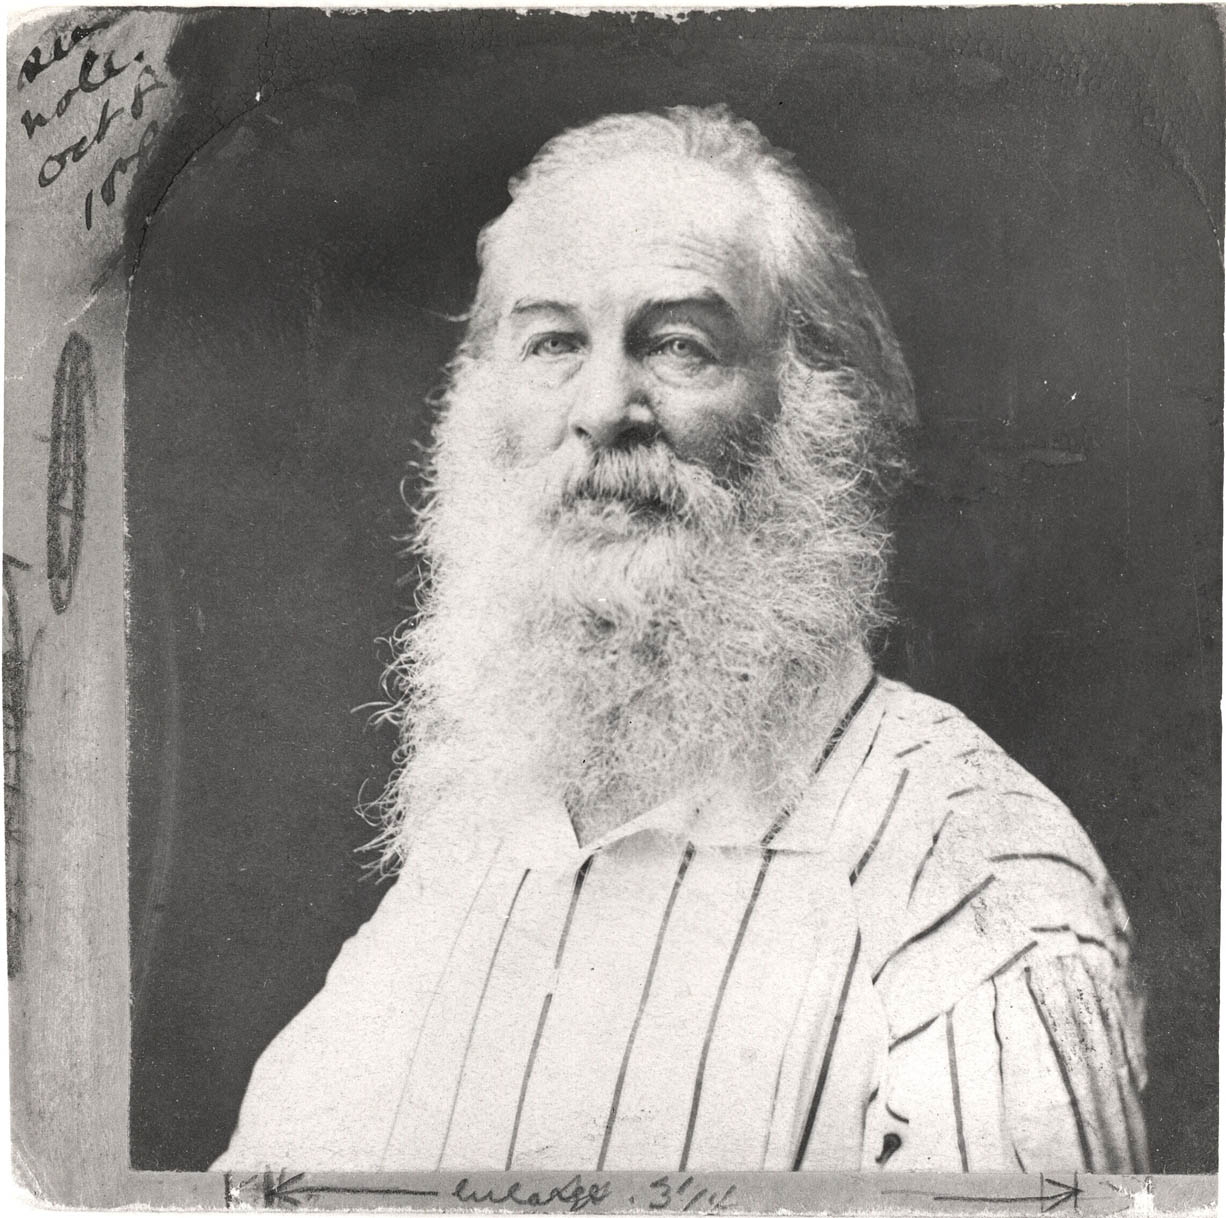 Whitman in a striped shirt. (Photo F. Pearsall, mid-1870s.)